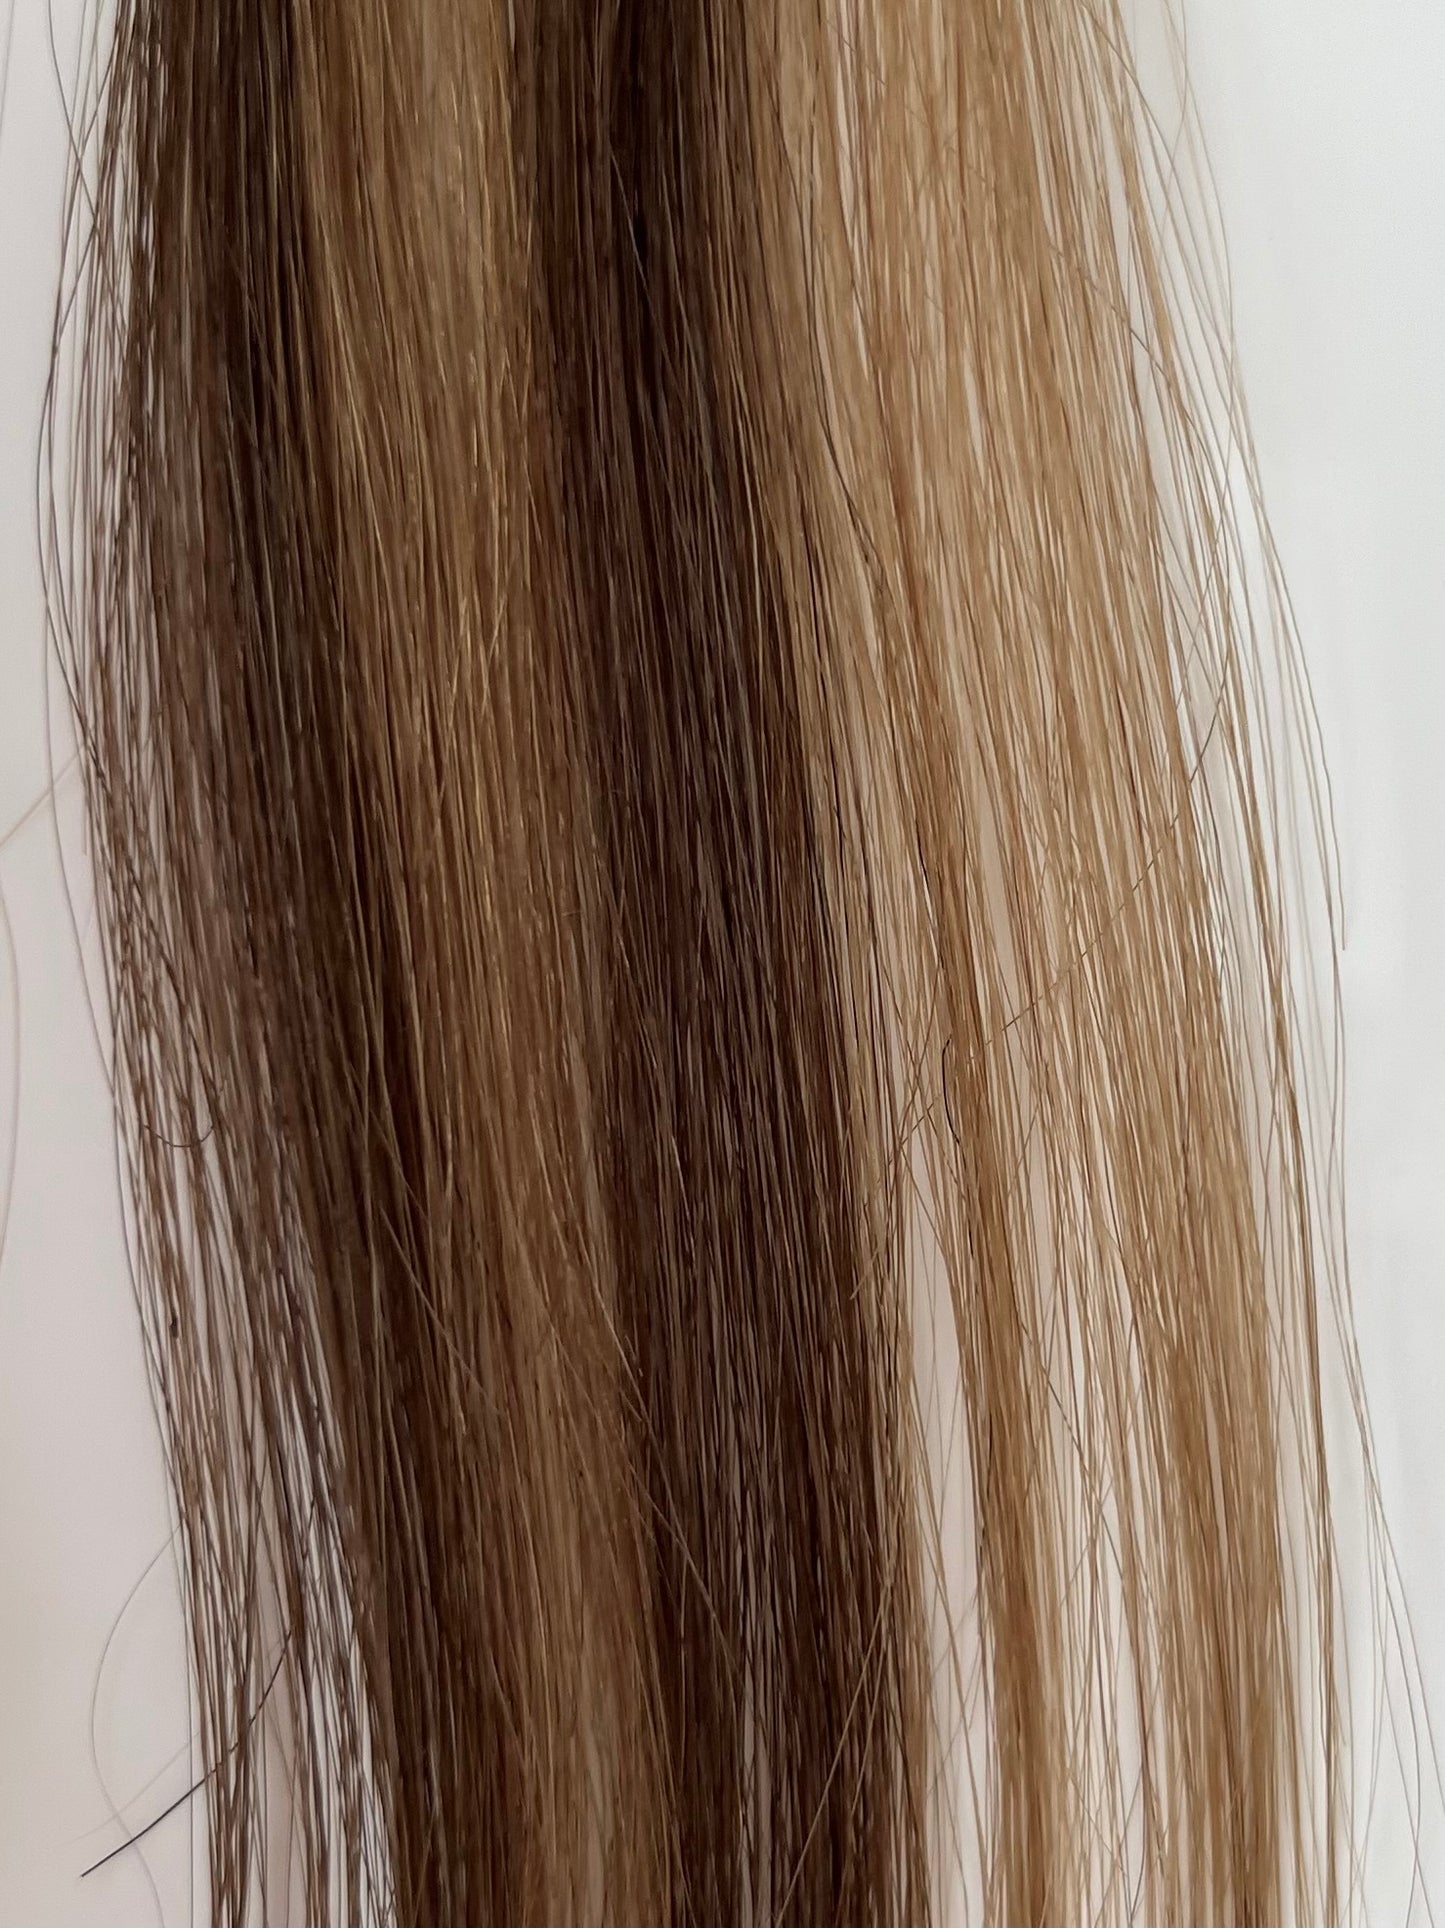 RETAIL HALO EXTENSIONS - HIGHLIGHTED - MOCHA QUEEN